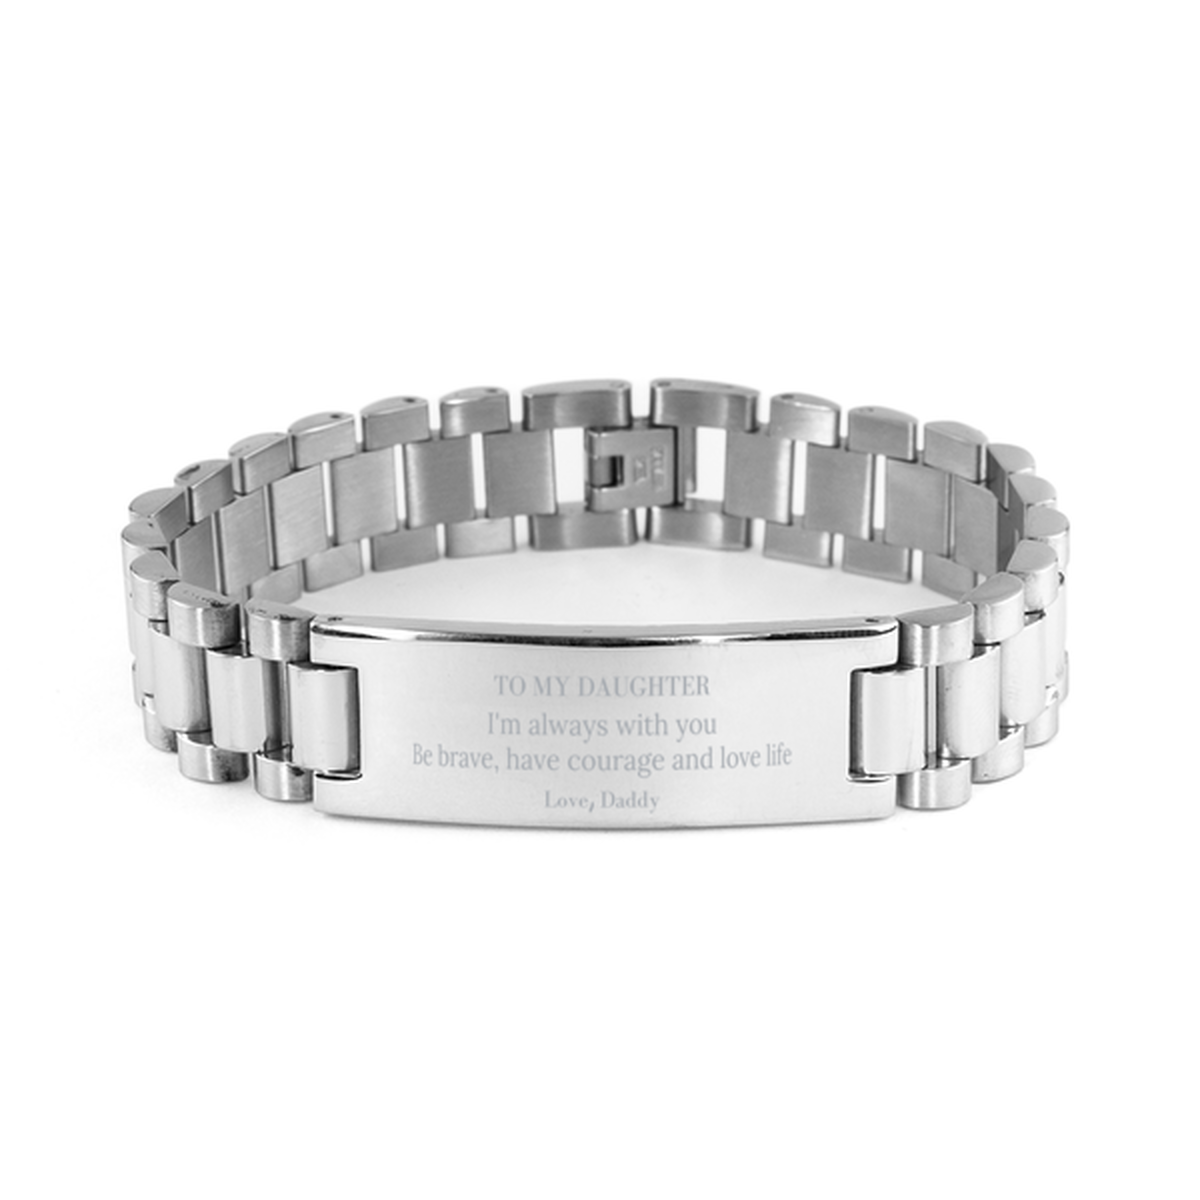 To My Daughter Gifts from Daddy, Unique Ladder Stainless Steel Bracelet Inspirational Christmas Birthday Graduation Gifts for Daughter I'm always with you. Be brave, have courage and love life. Love, Daddy